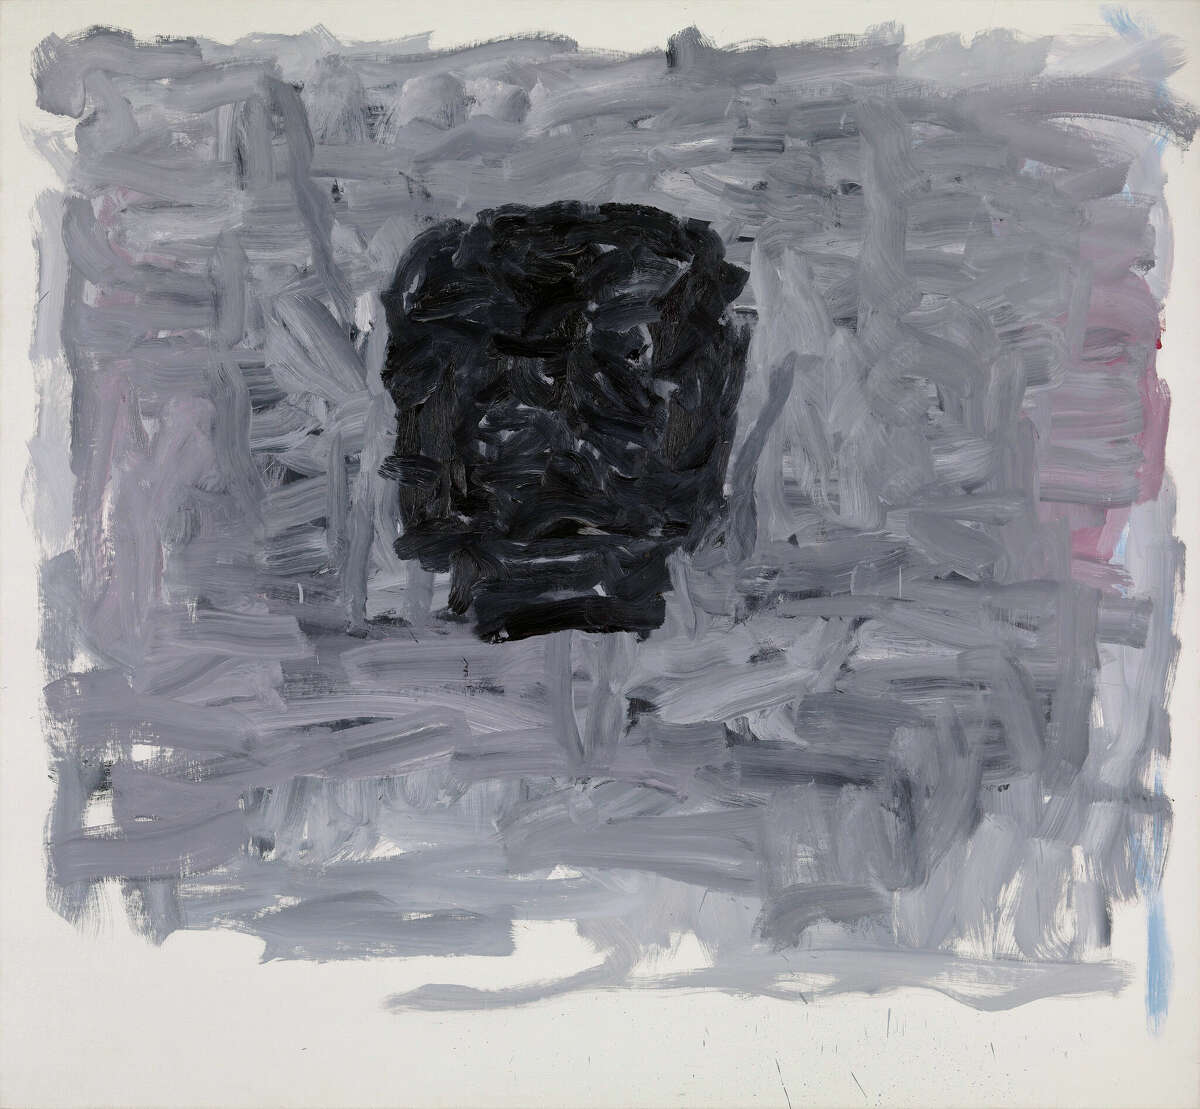 "Head" by Philip Guston